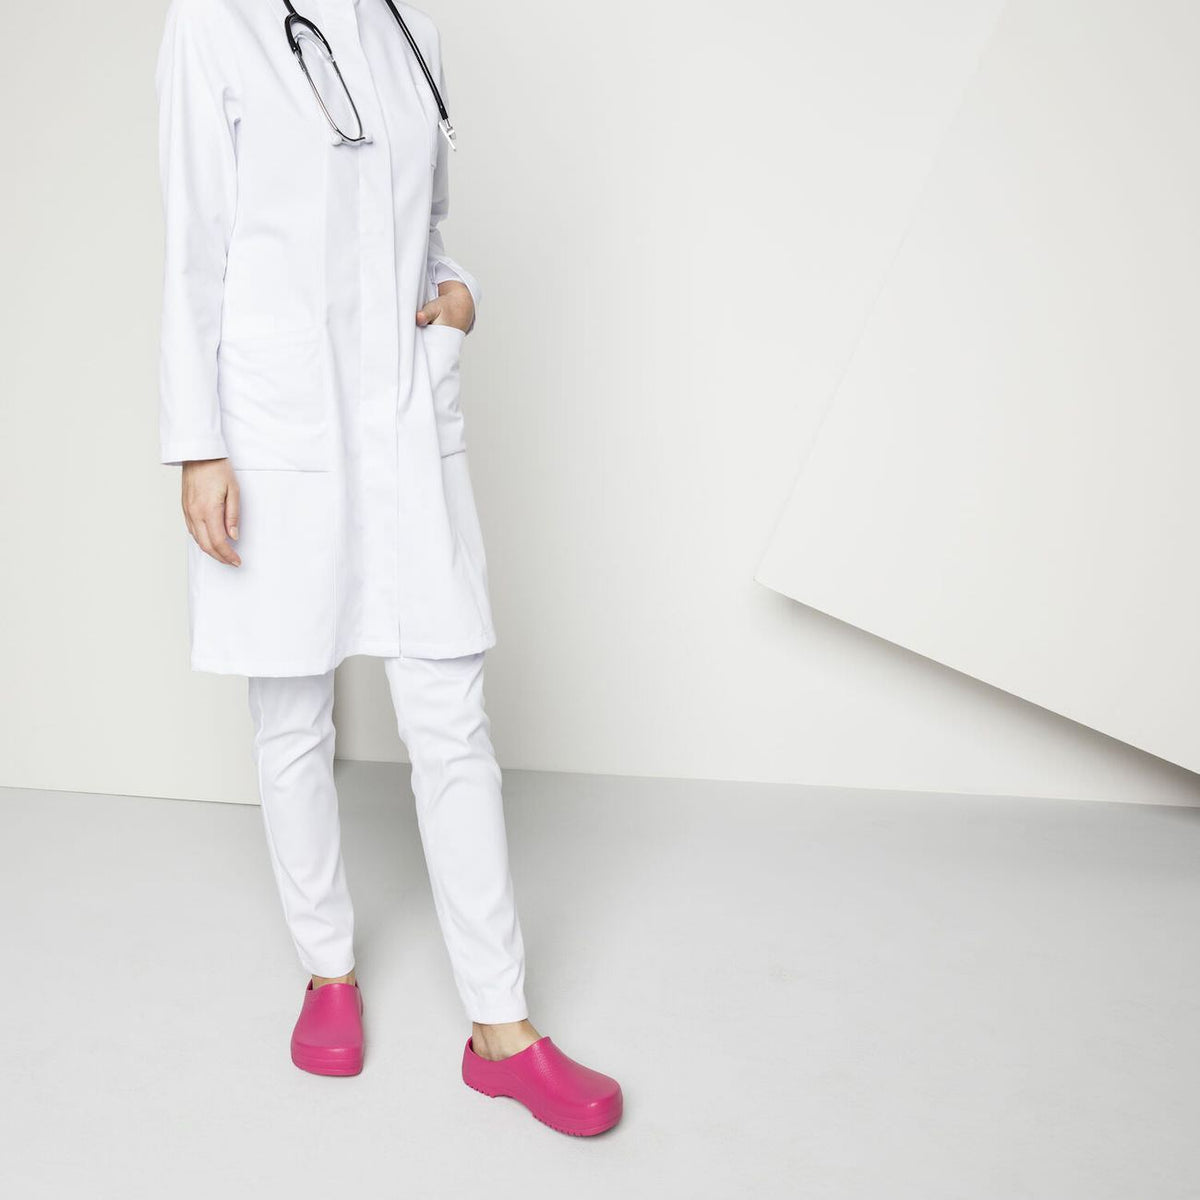 Birkenstock Super Birki Raspberry Worn by a lady in a white coat and white pants on a white background